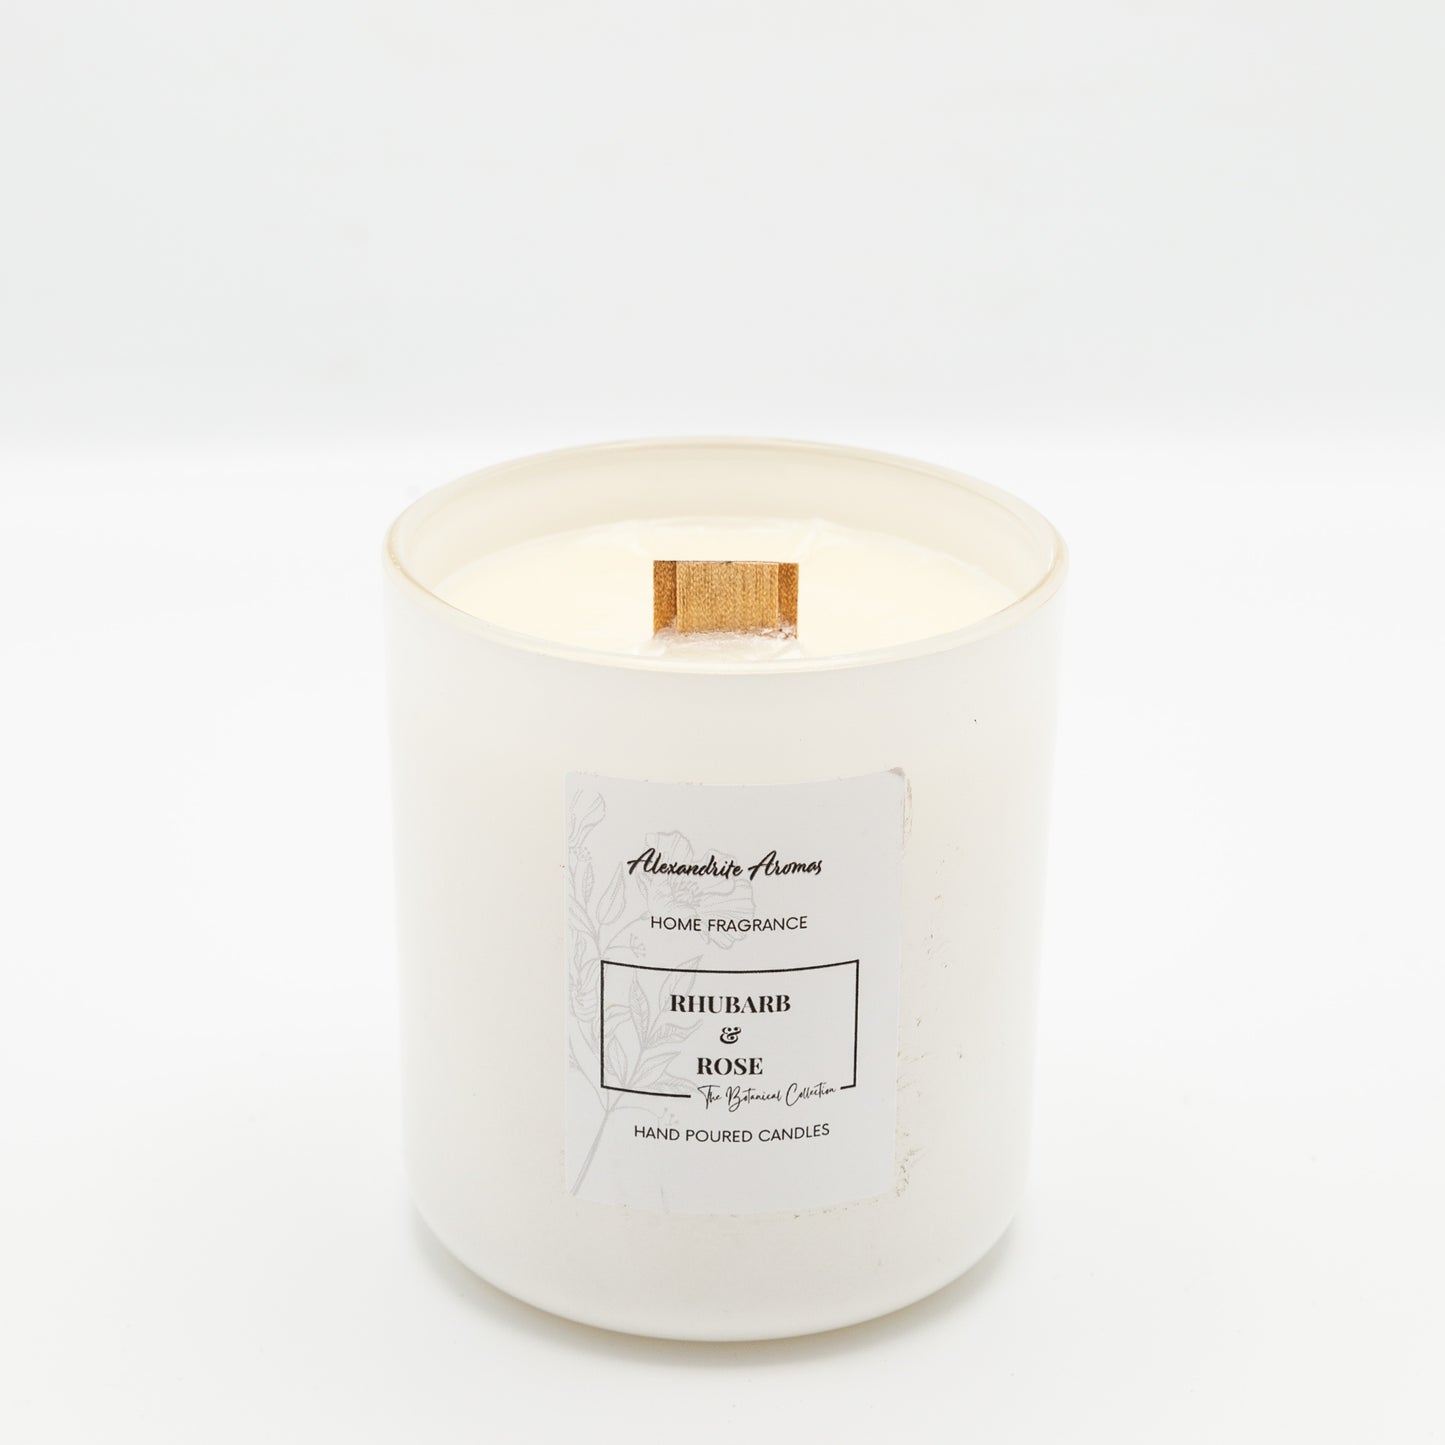 Rhubarb and Rose - Vogue Candle